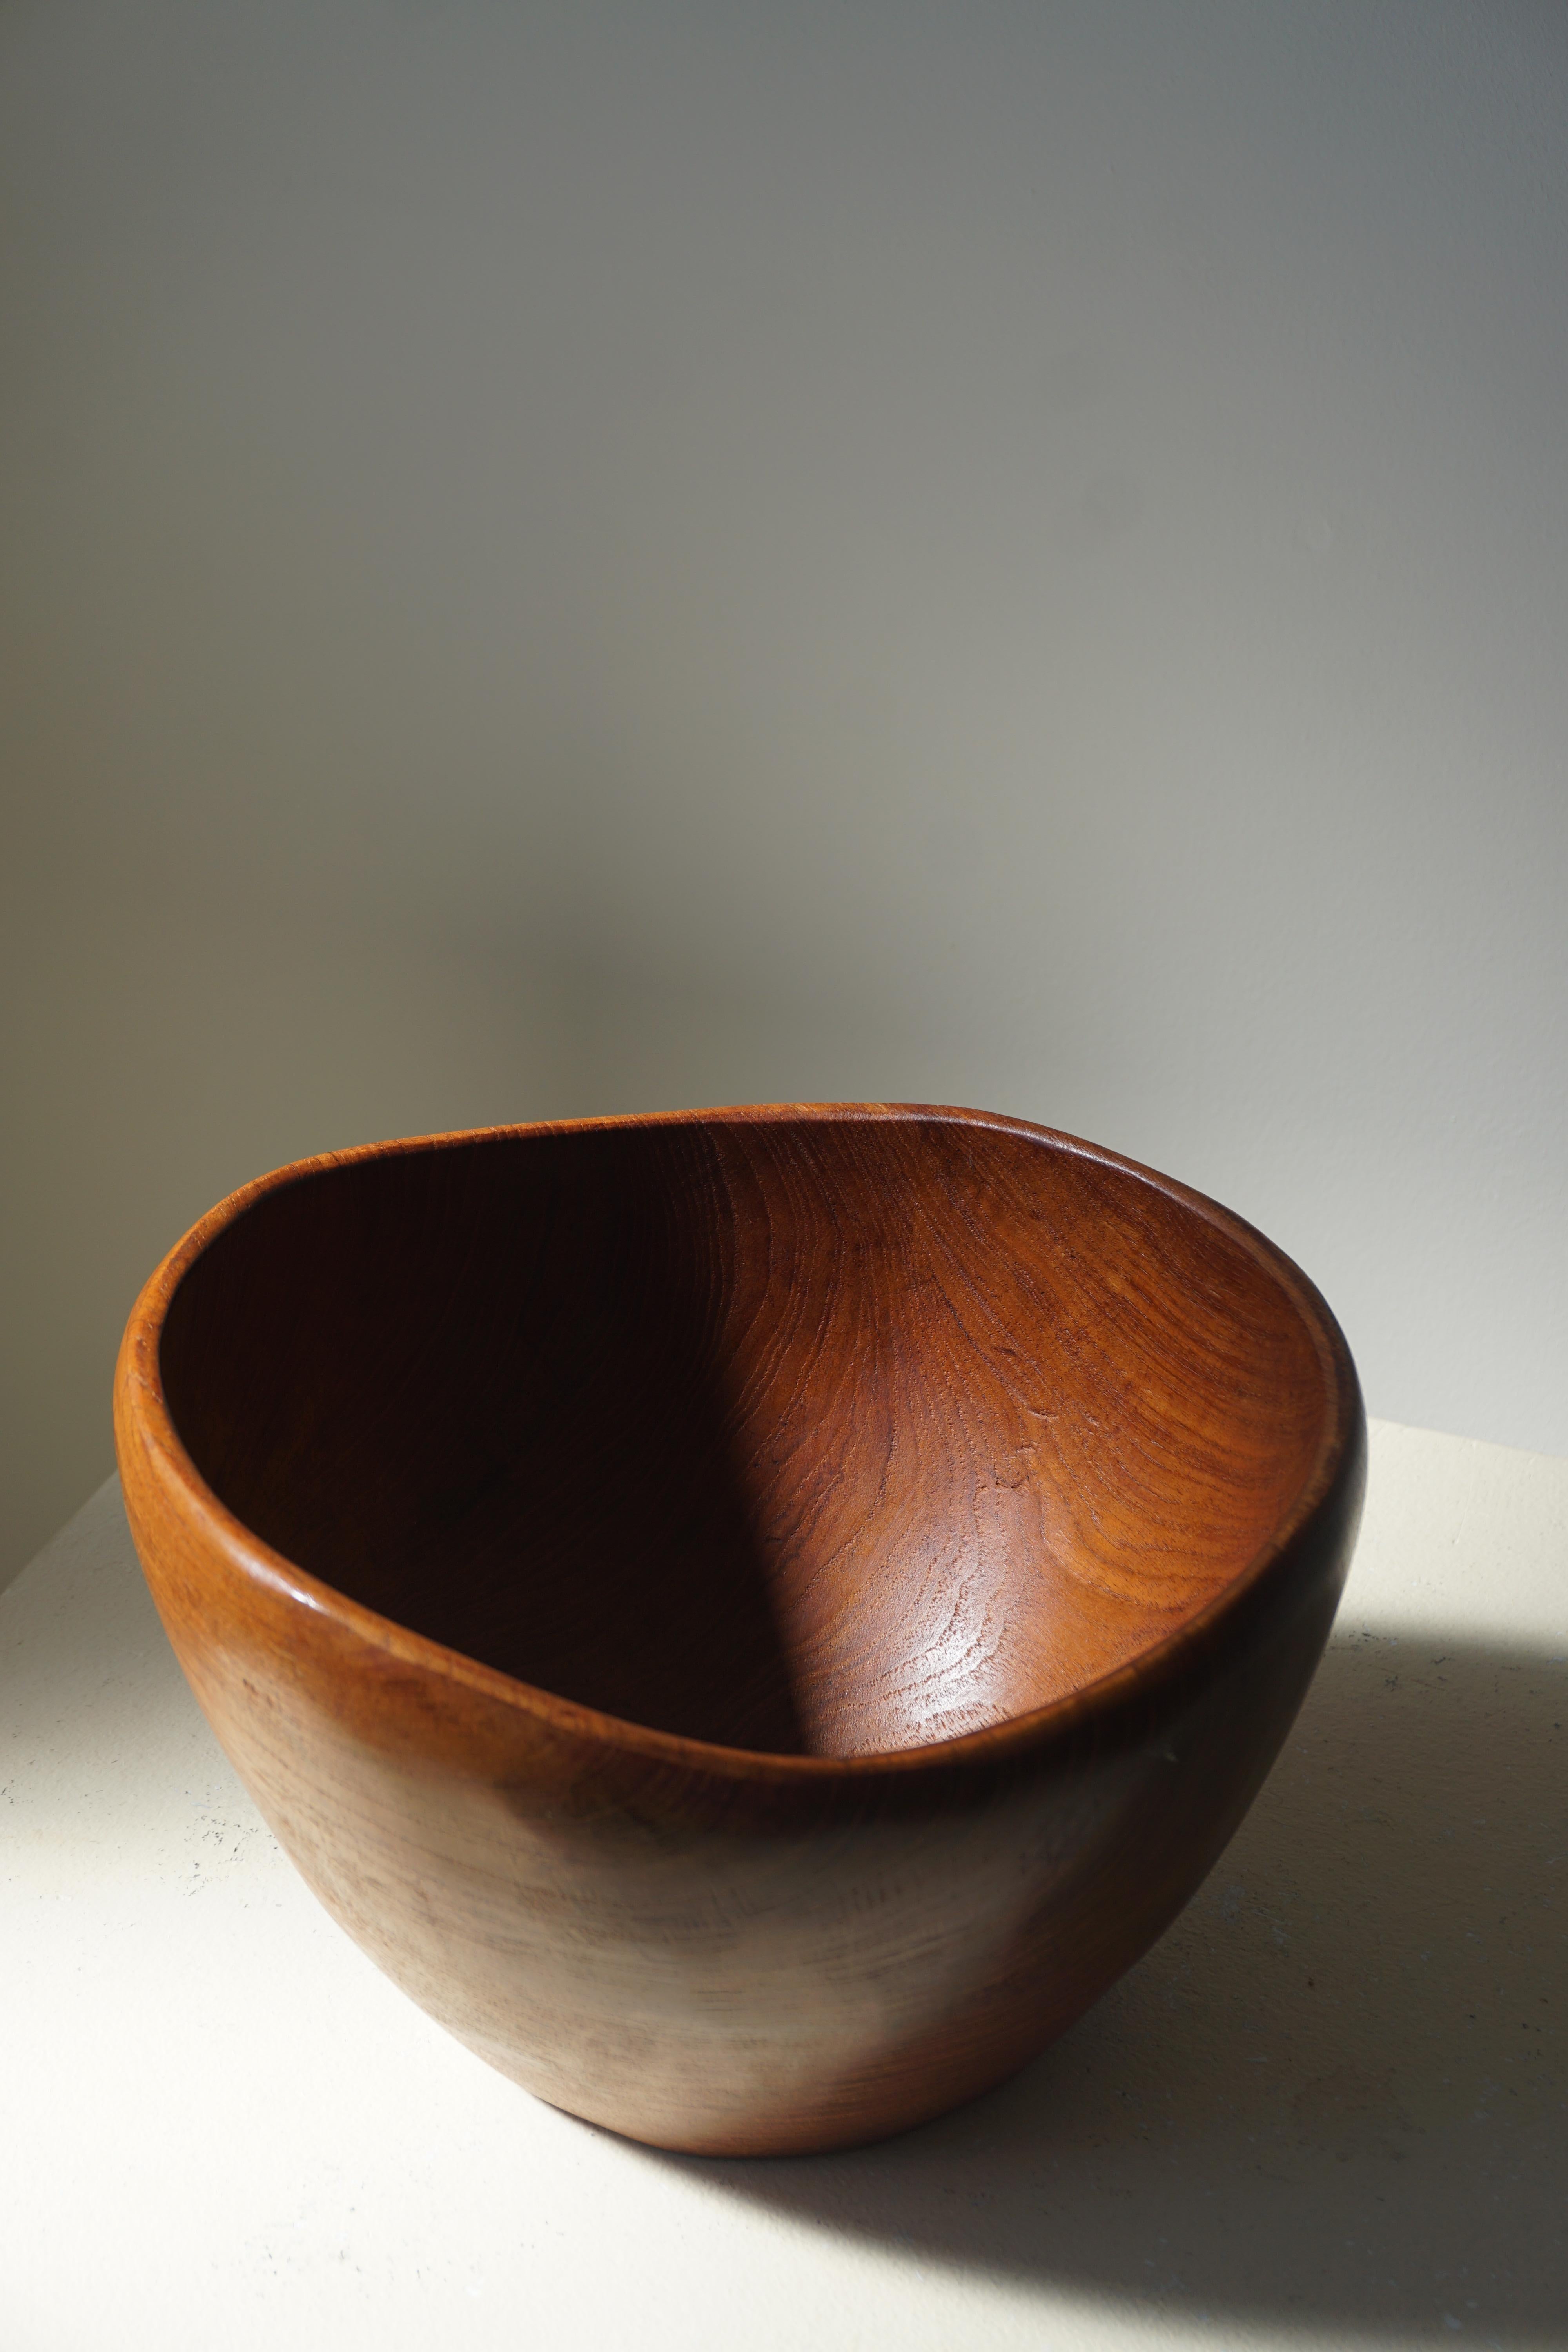 Beautiful patinated bowl in teak. Handcrafted in 1960s

Suits the modern interior.